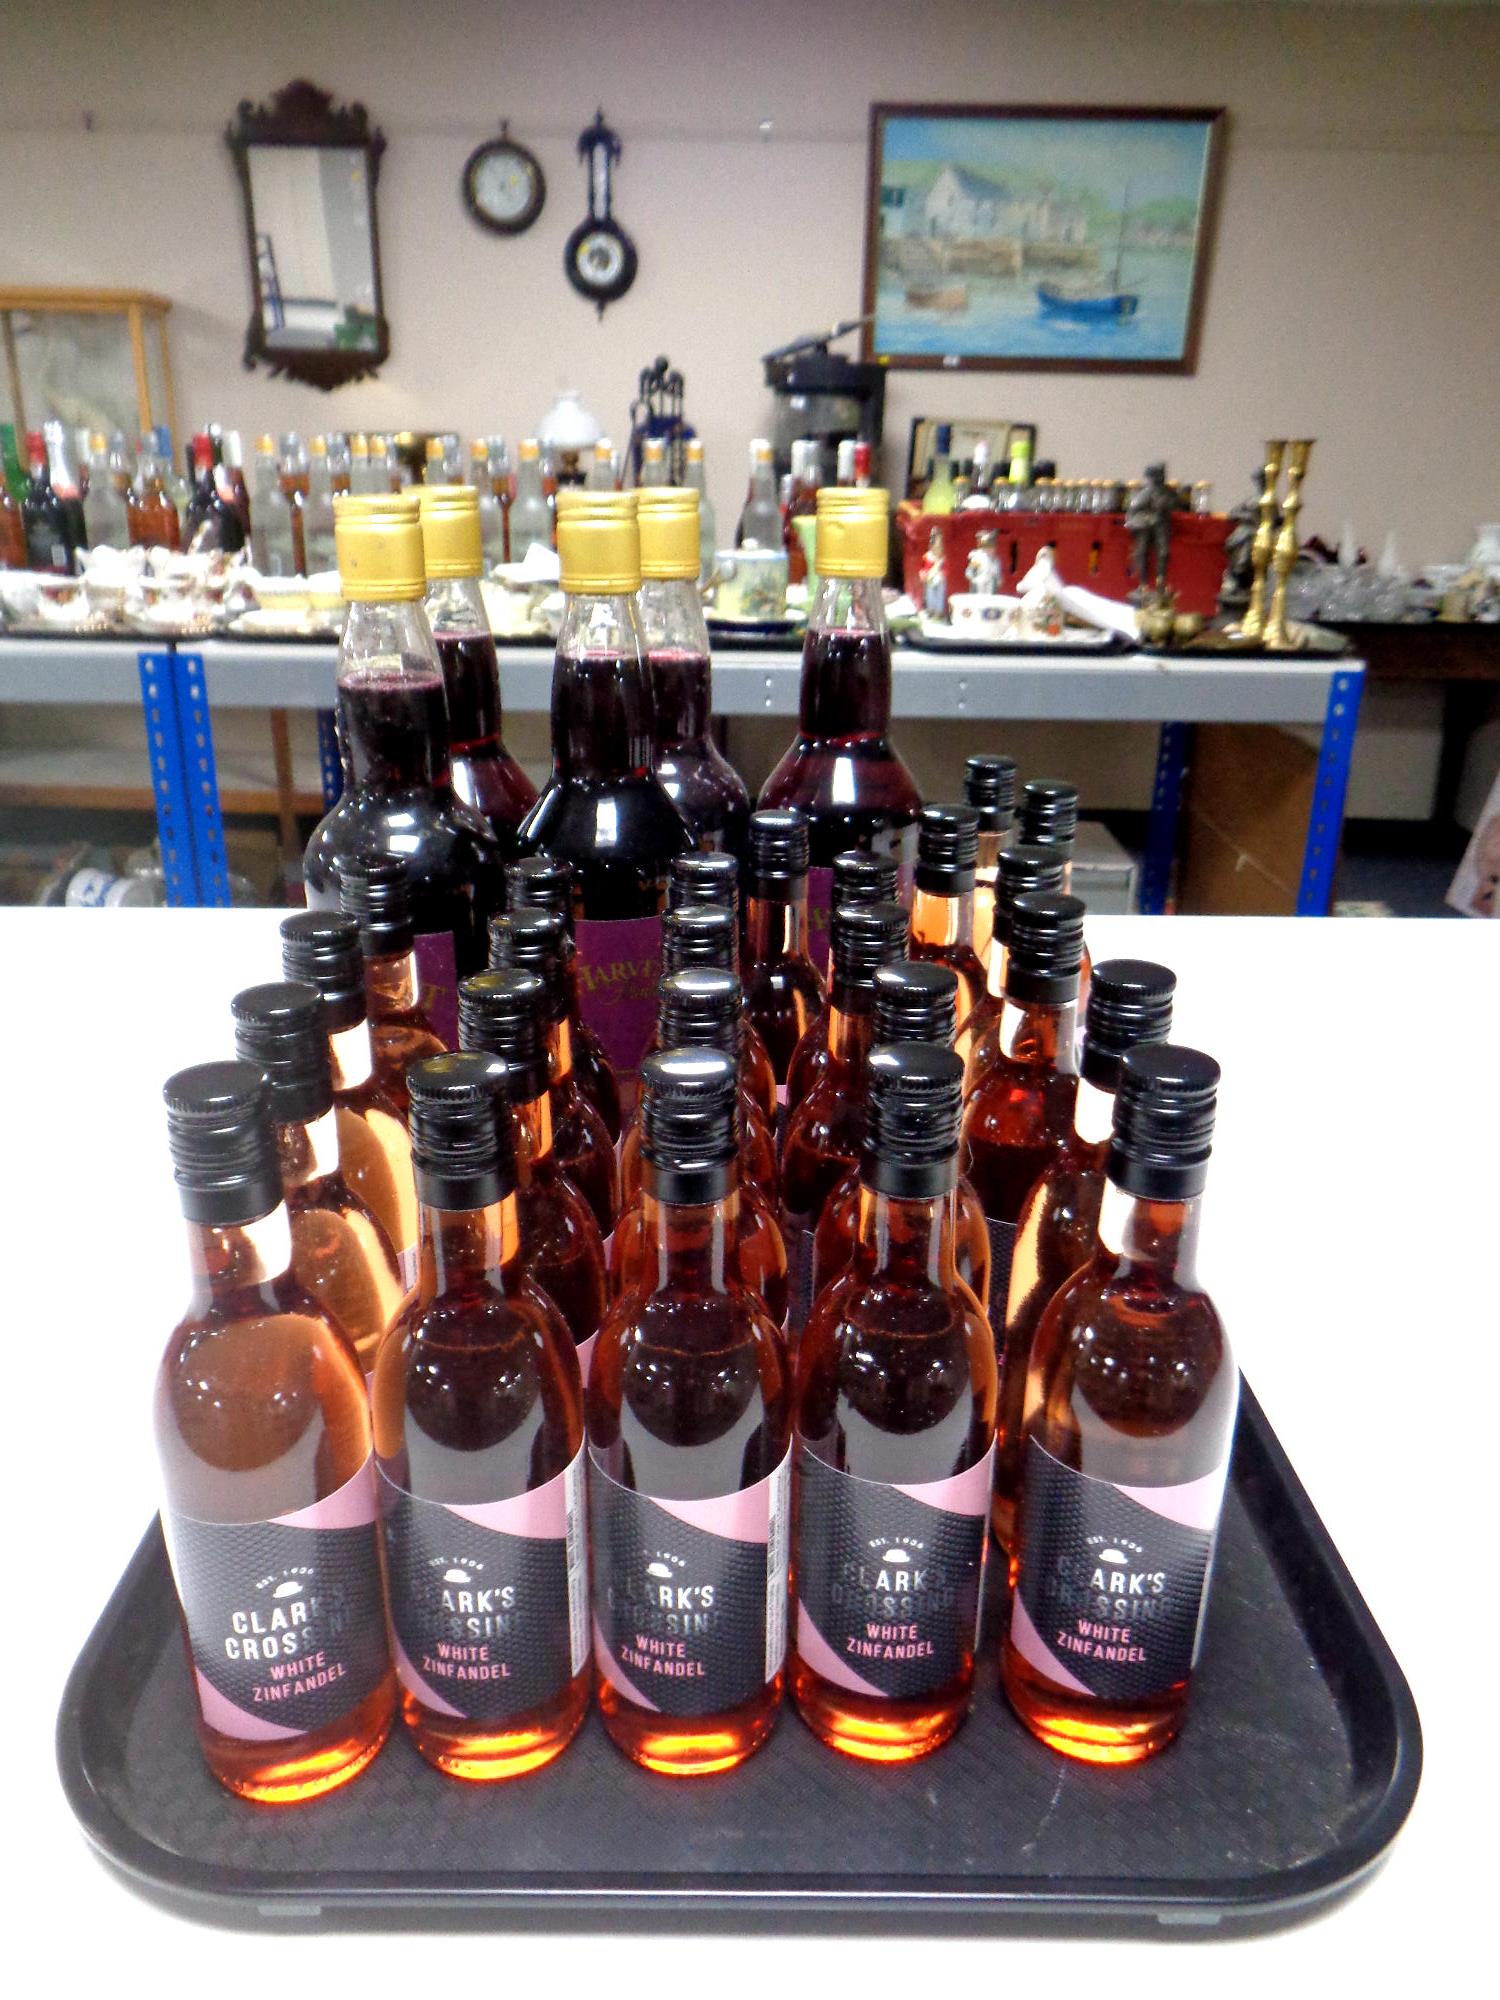 A tray containing five bottles of Harvest Fruits Mulled Wine together with 24 bottles of Clark's